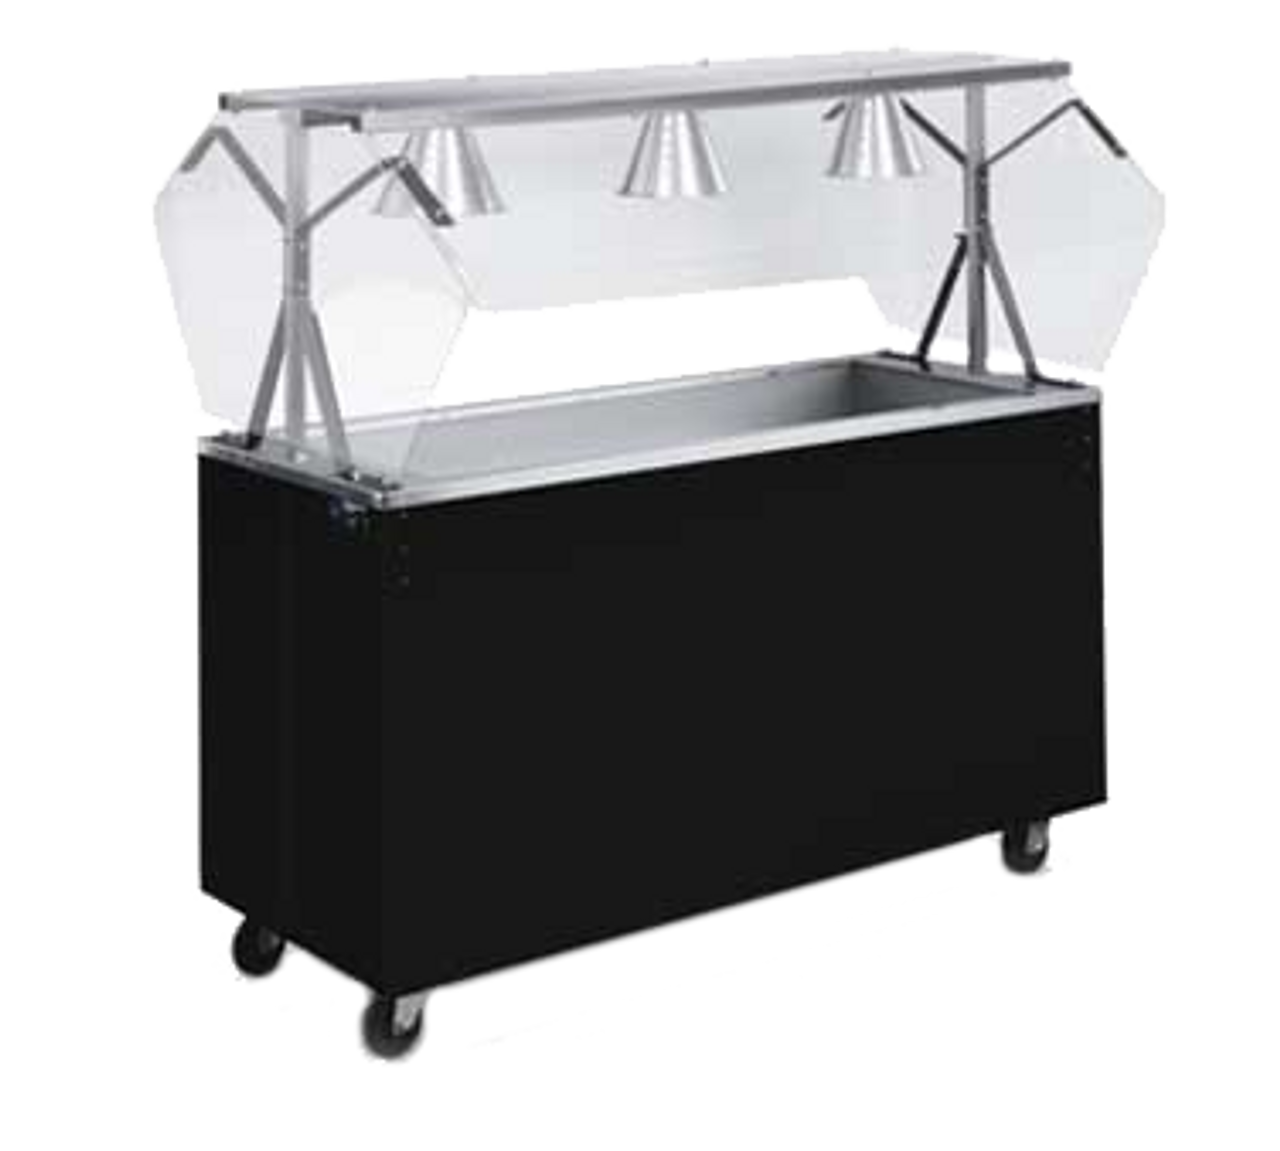 2-Series Affordable Portable™ Cold Food Station, non-refrigerated, (3) pan, 46"W x 39-1/2"D x 35"H, 6"deep stainless well with 1" drain, 35"H work surface, includes buffet style acrylic breath guard with 12" clearance, walnut woodgrain finish solid base, (4) locking casters, NSF, Made in USA, made to order, cannot be cancelled or returned